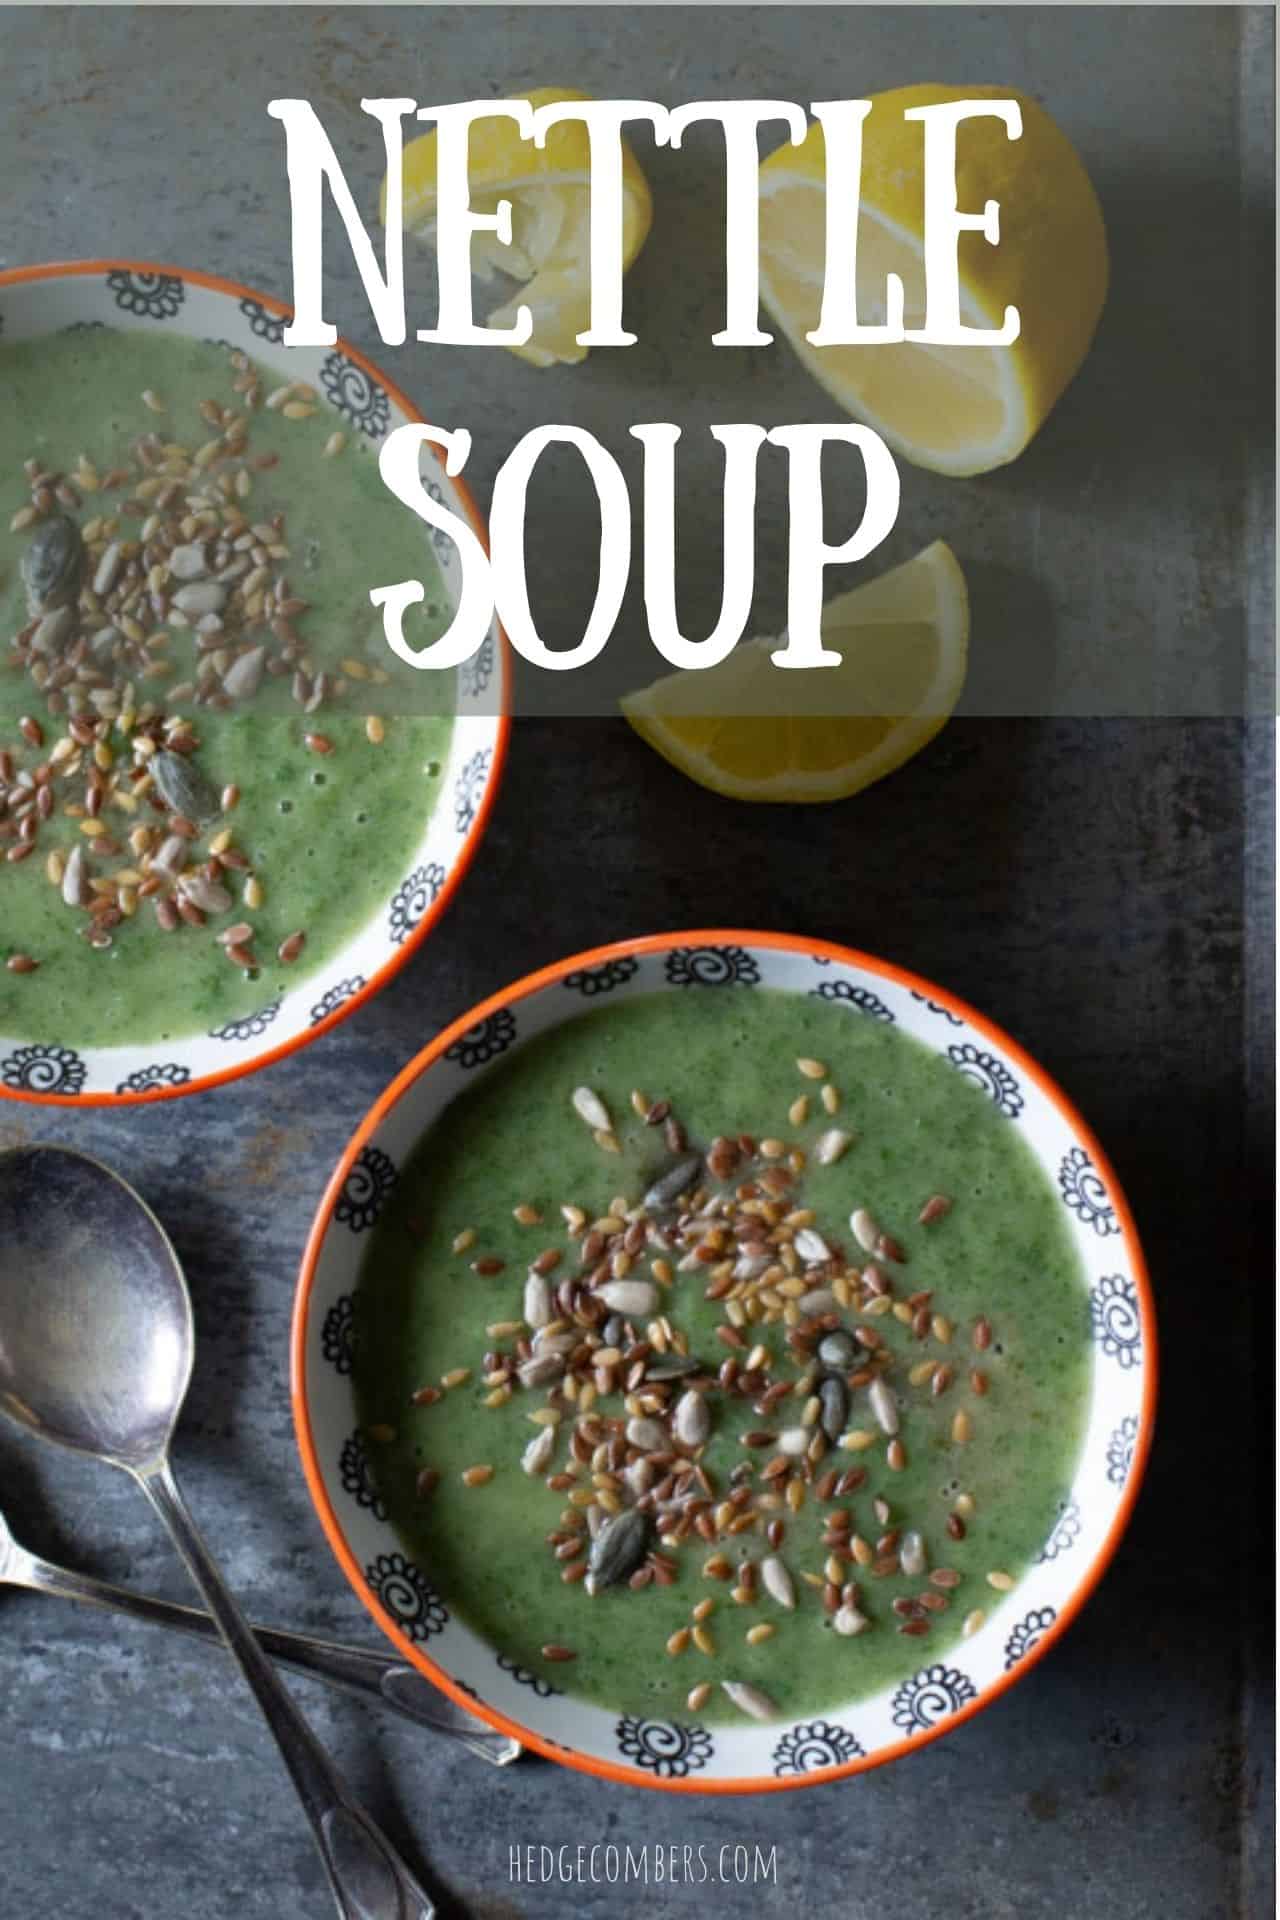 2 orange and white bowls filled with a green soup sprinkled with mixed seeds on a grey metal background with soup spoons and lemon slices